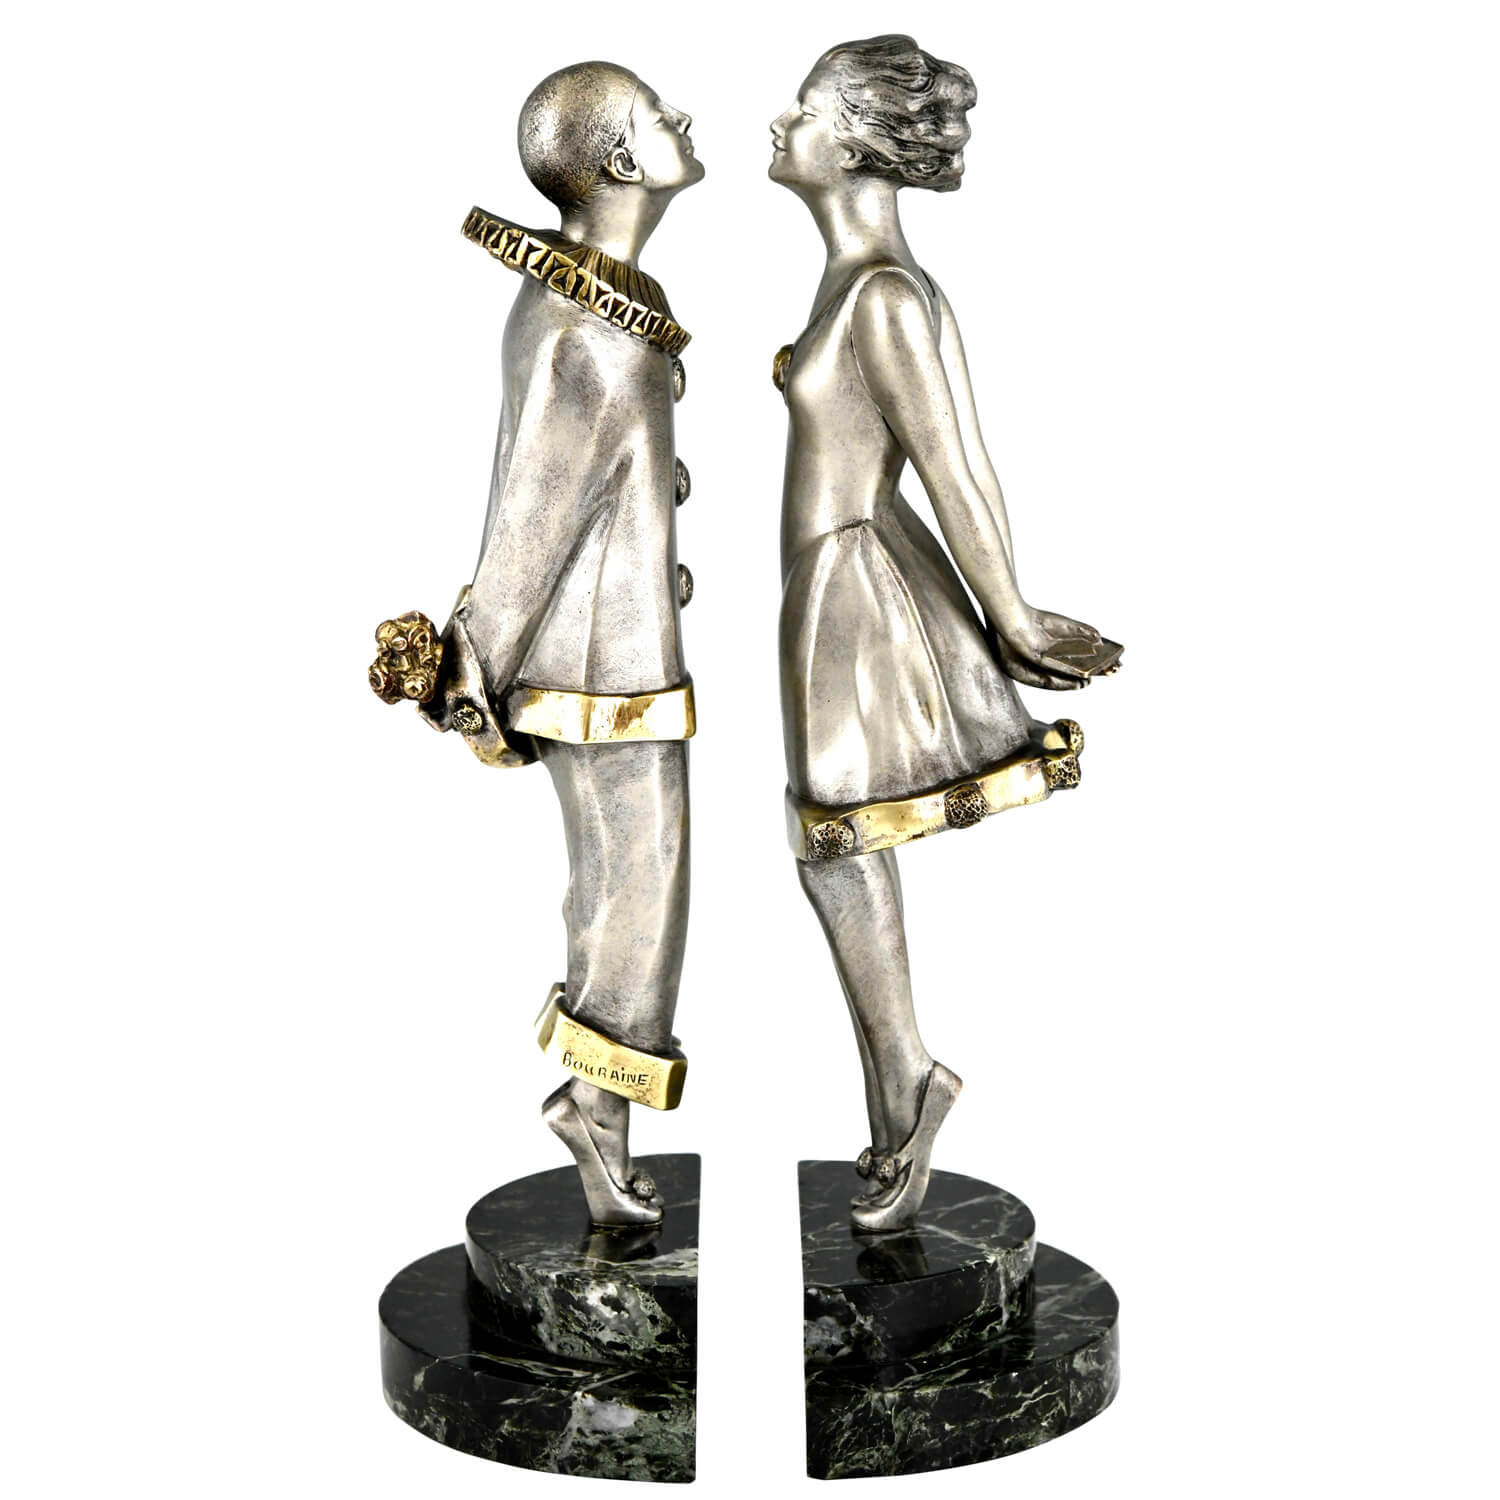 Art Deco bronze bookends Pierrot and girl by Bouraine